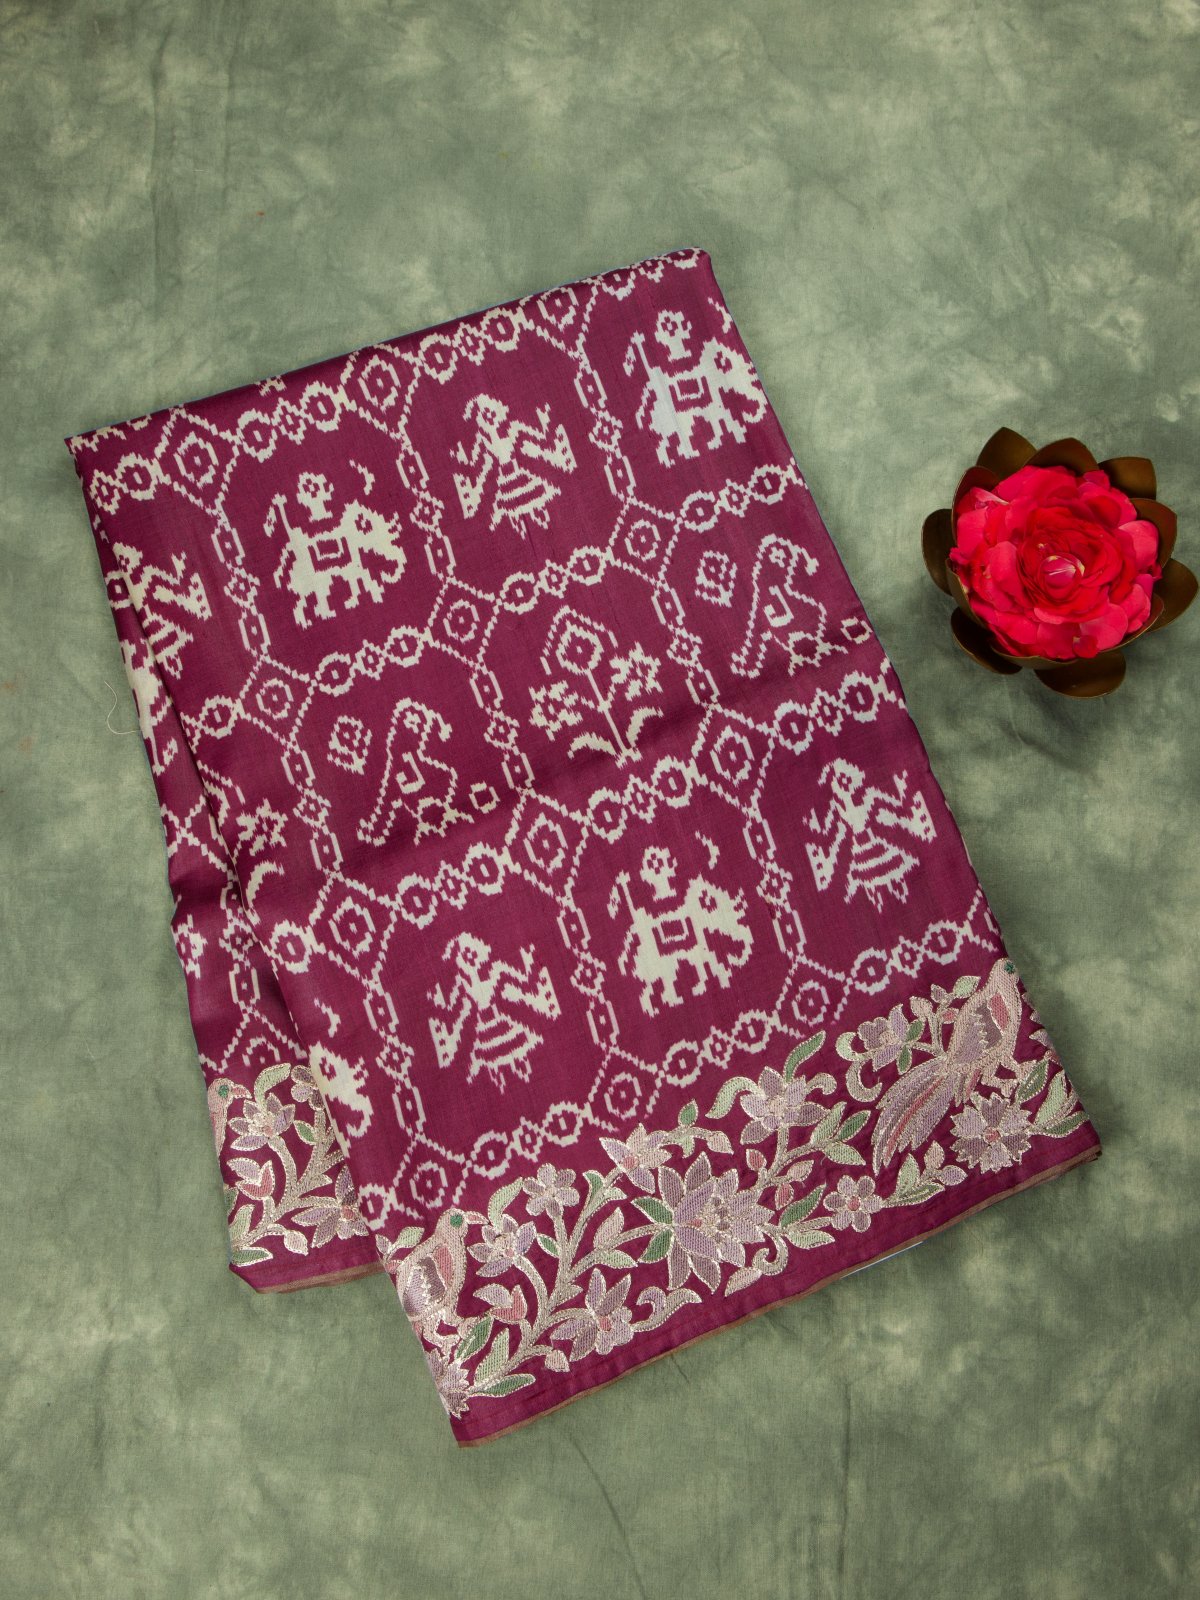 Violet Tussar Silk Saree with Floral Embroidery Border